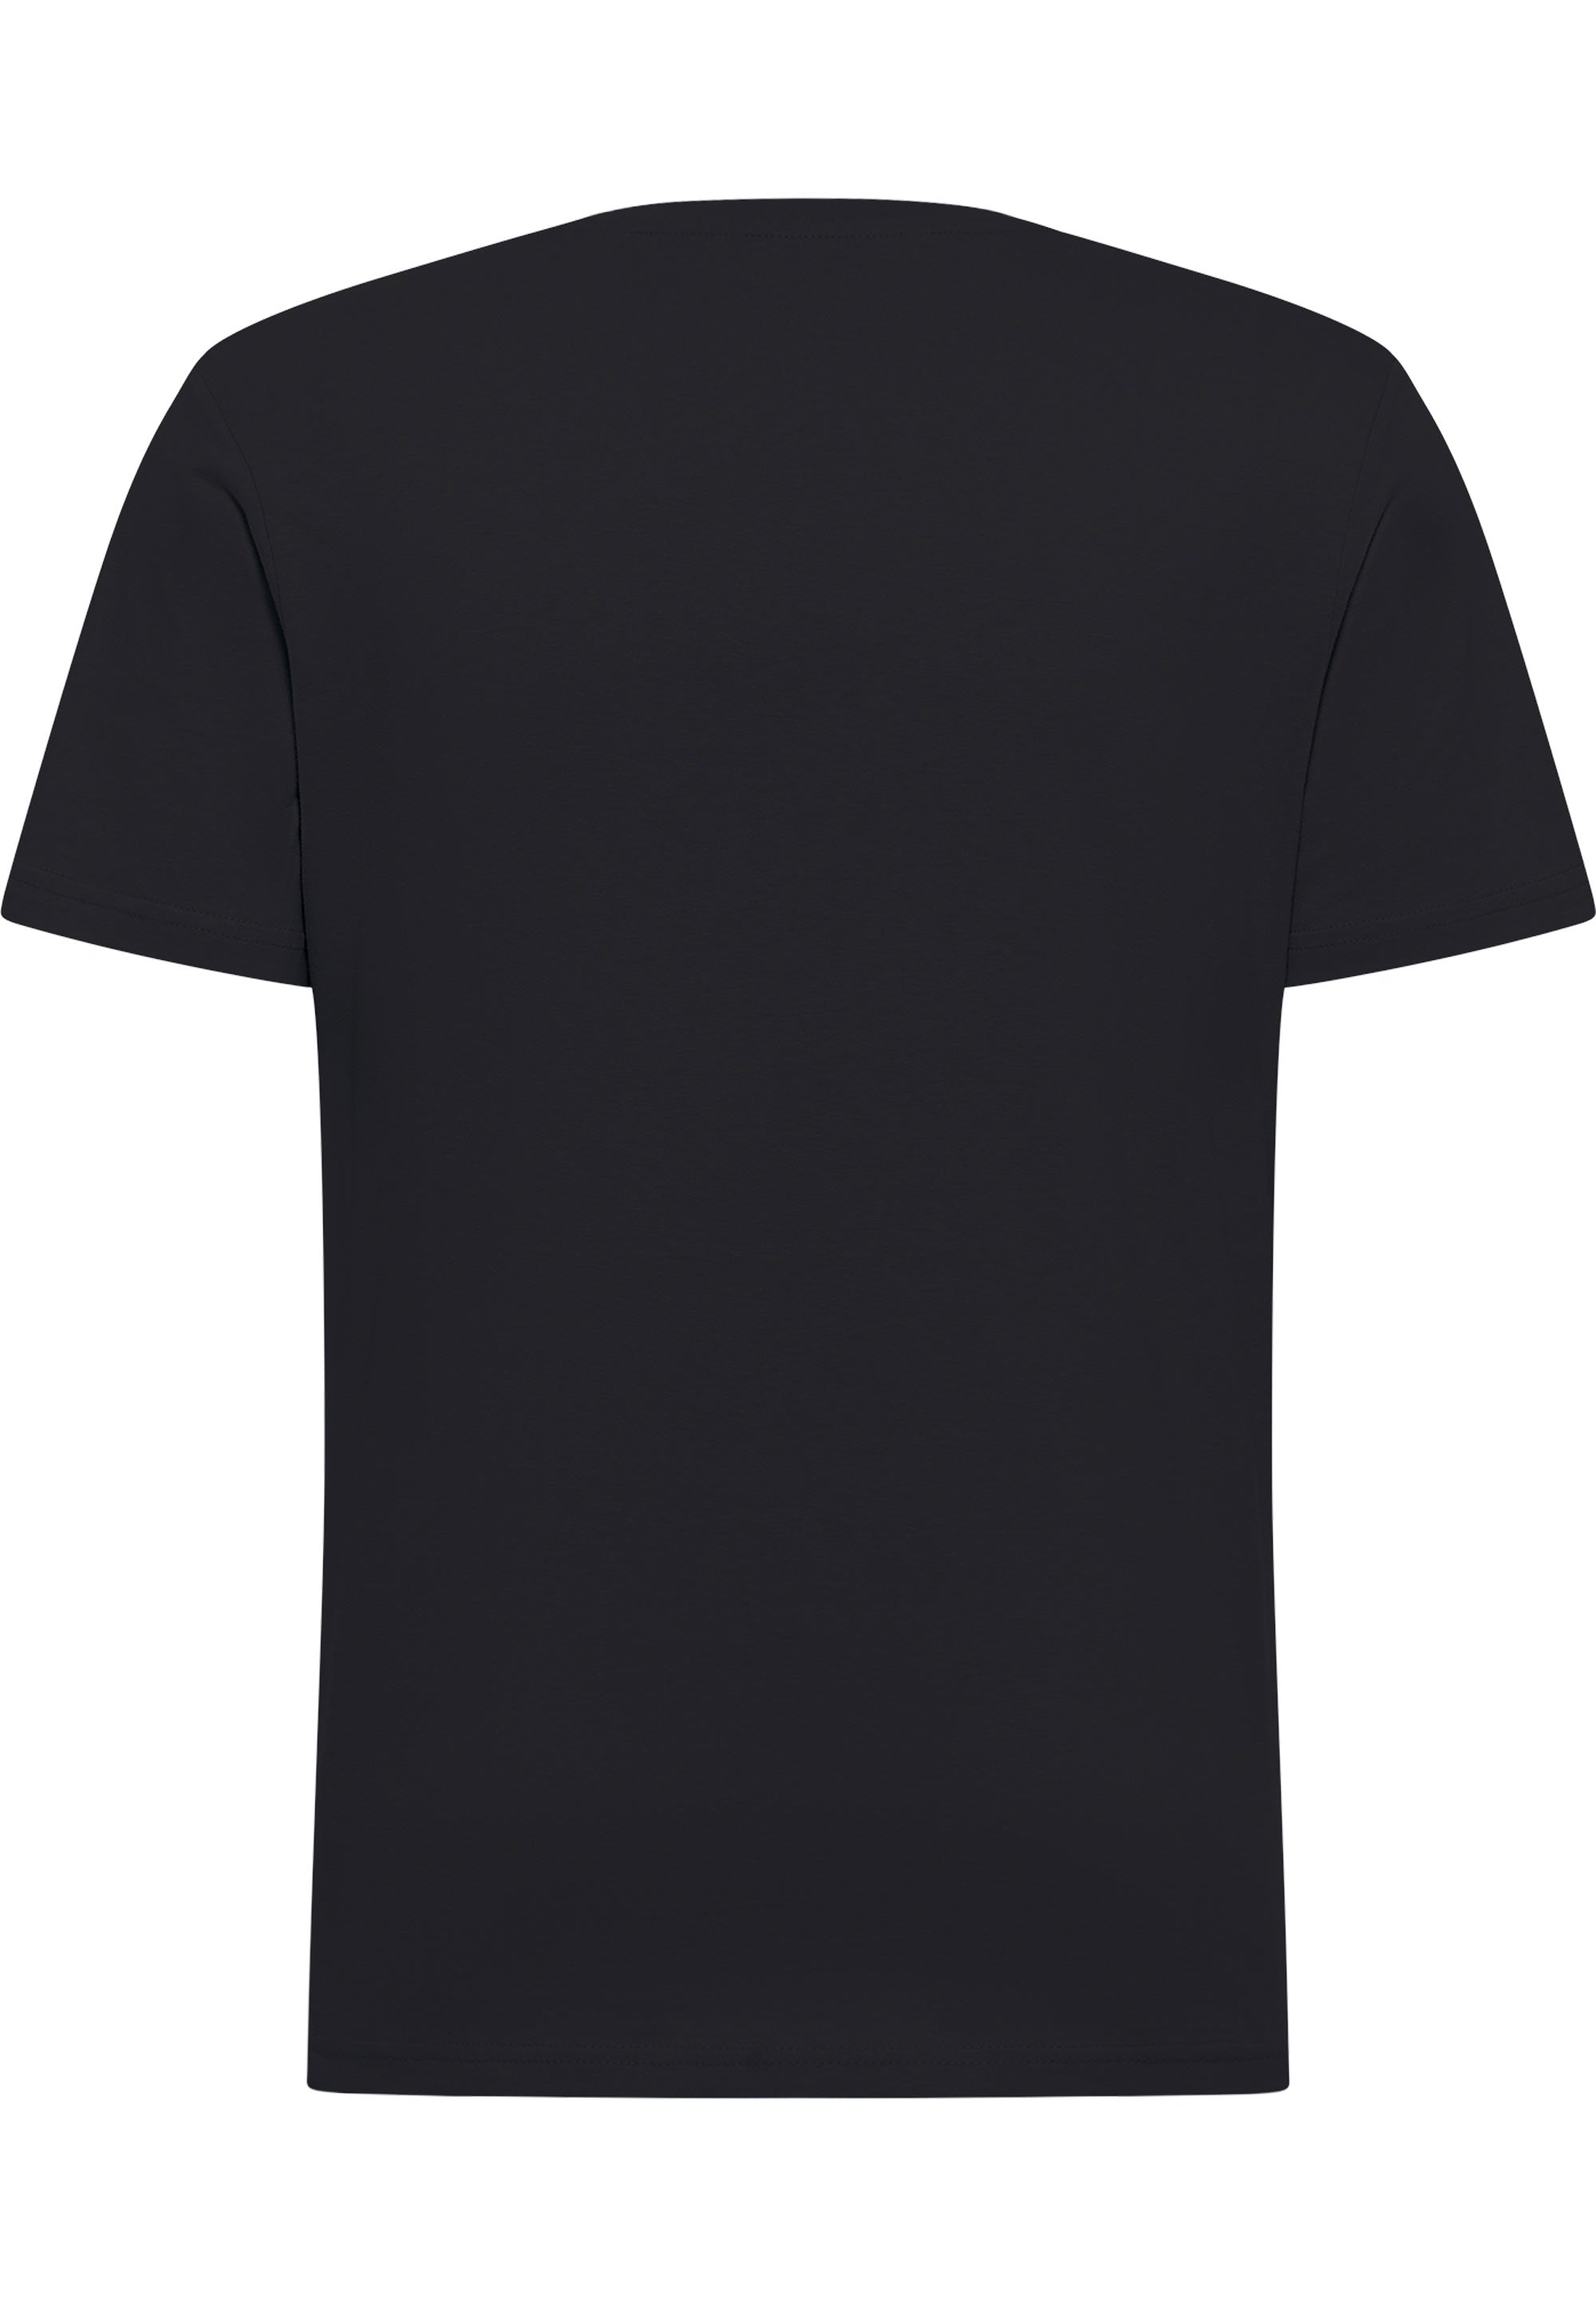 SOMWR REMOTE TEE T-Shirt BLK000